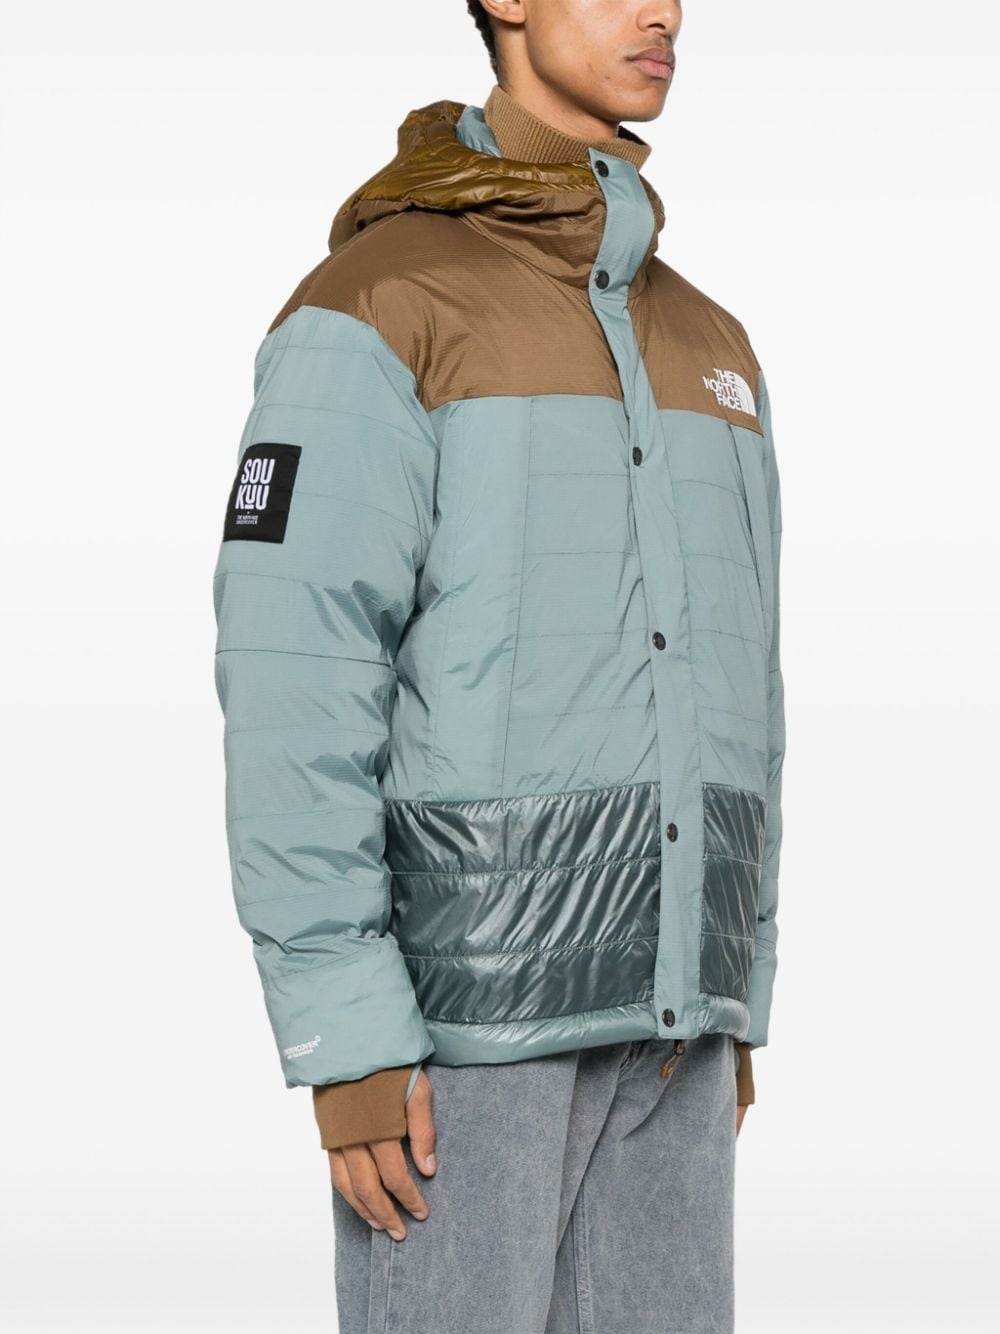 Undercover x The North Face 50/50 Mountain Jacket (NF0A84S3WI7) - 4